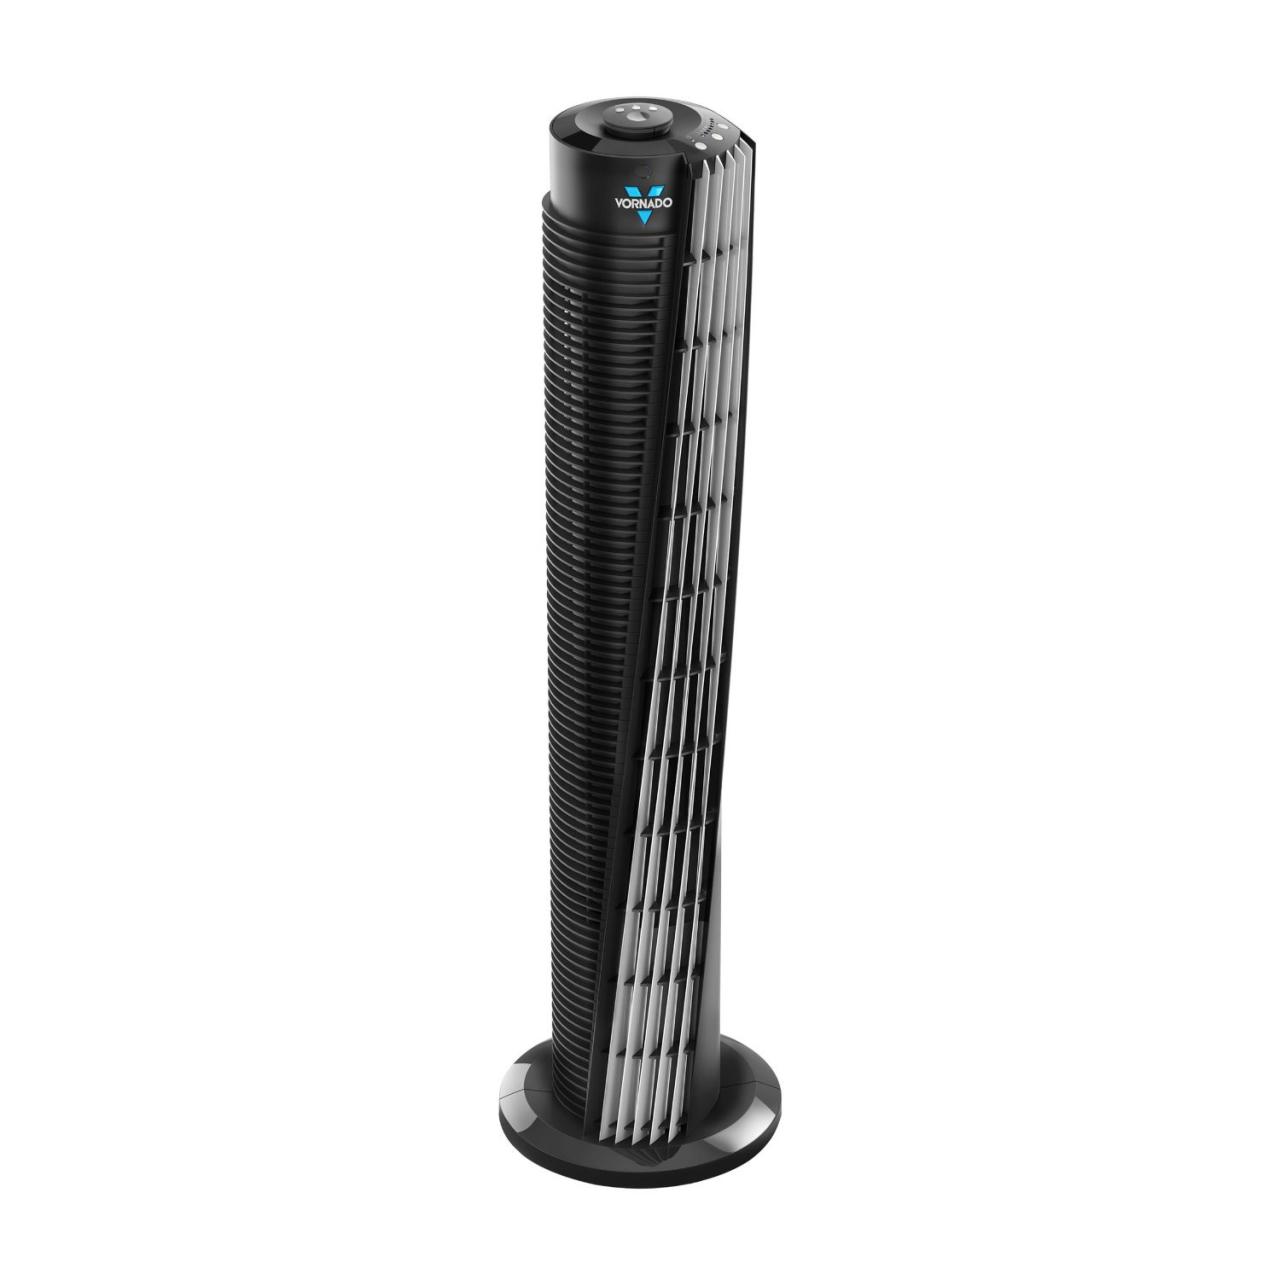 Top 10 Best Cooling Tower Fans for Rooms In 2016